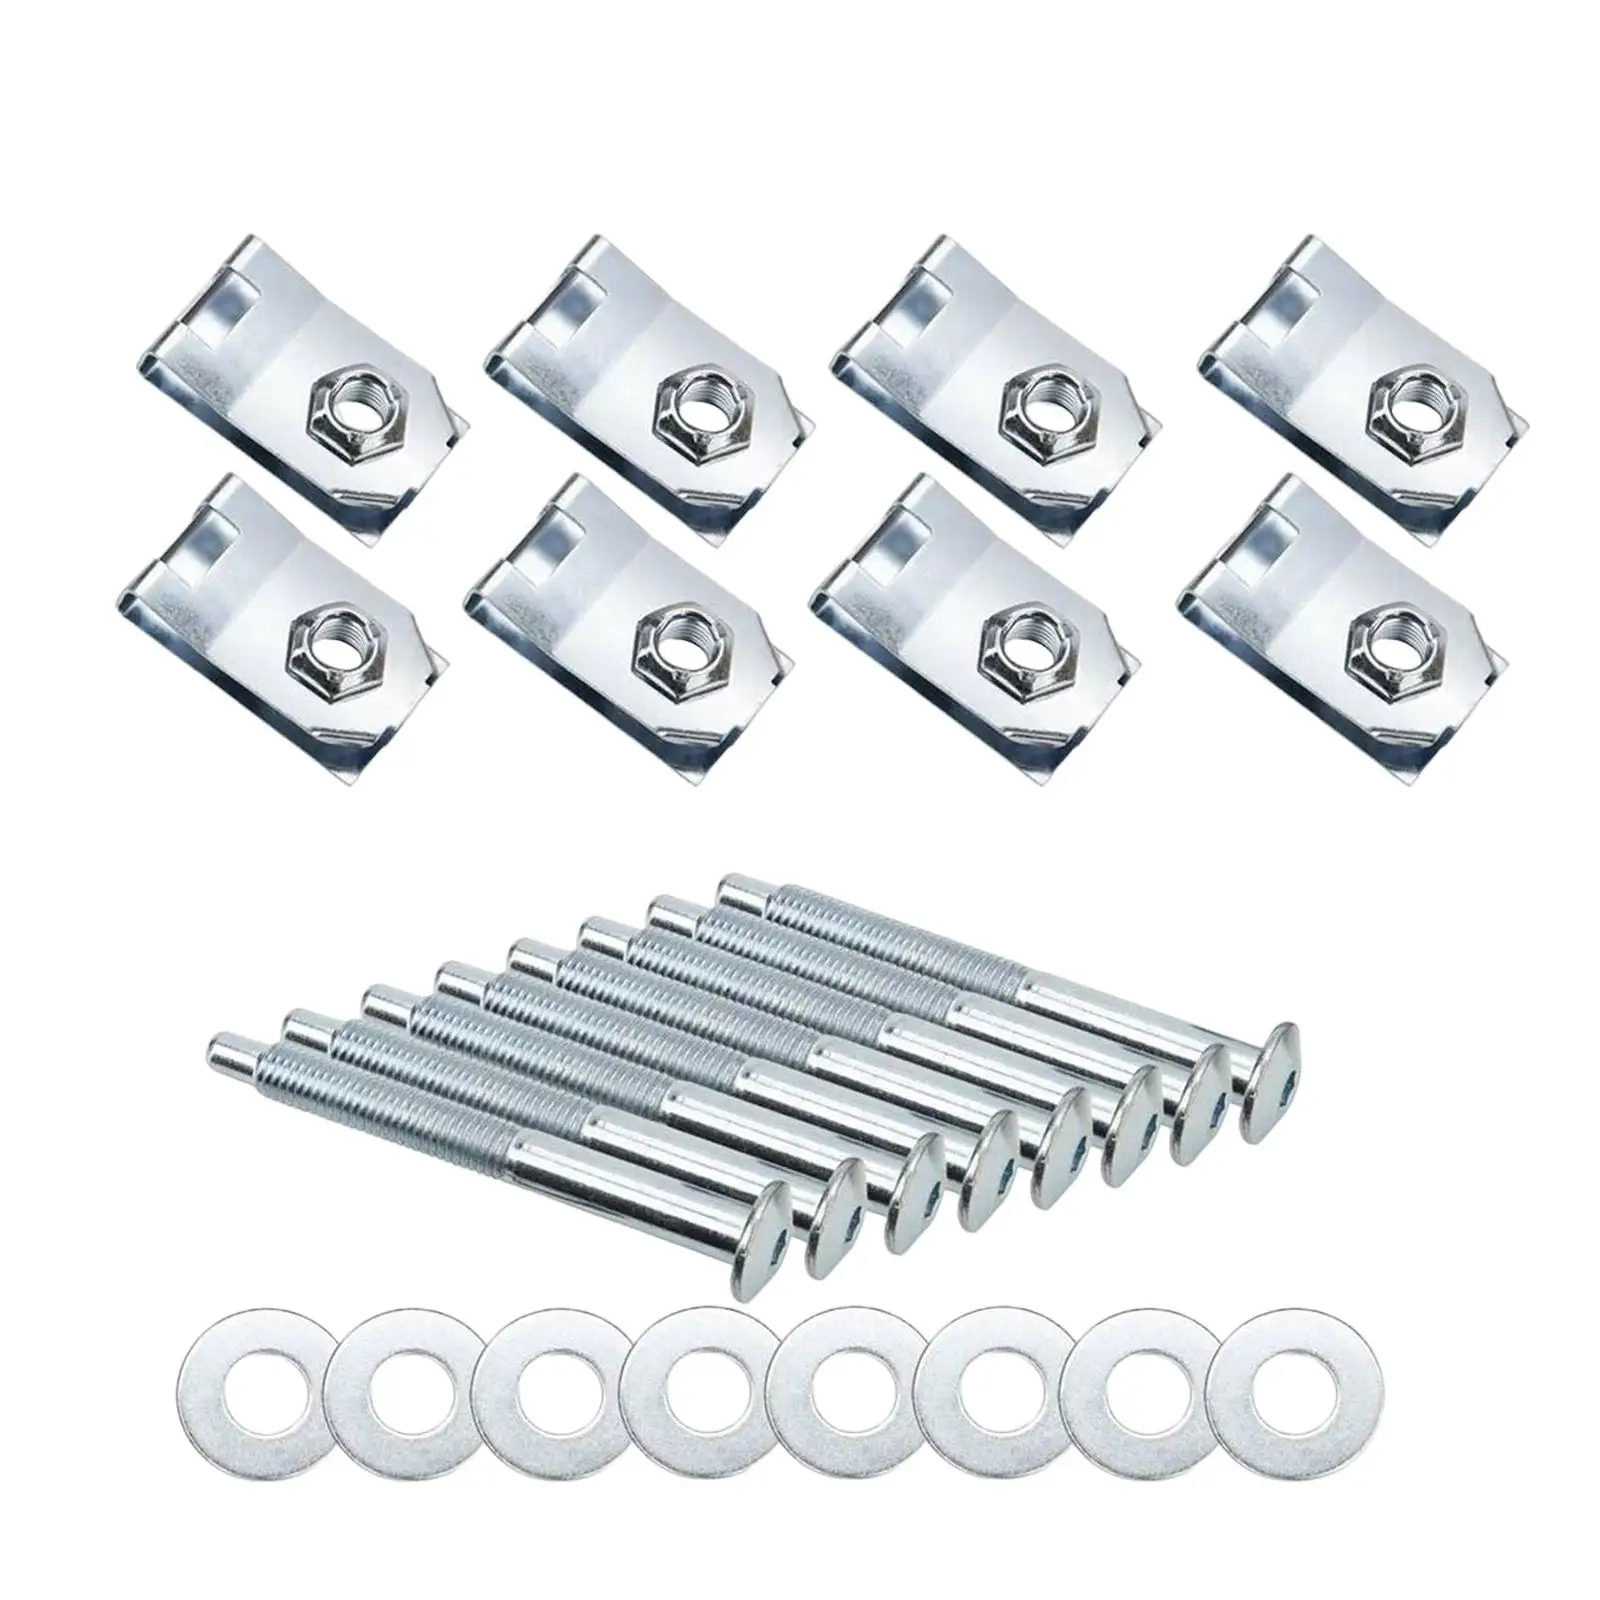 

924 311 Truck Bed Mounting Bolt Kit Replace Parts Hardware Bolts Fasteners Fit for F250 Ford Super Duty F550 F450 F350